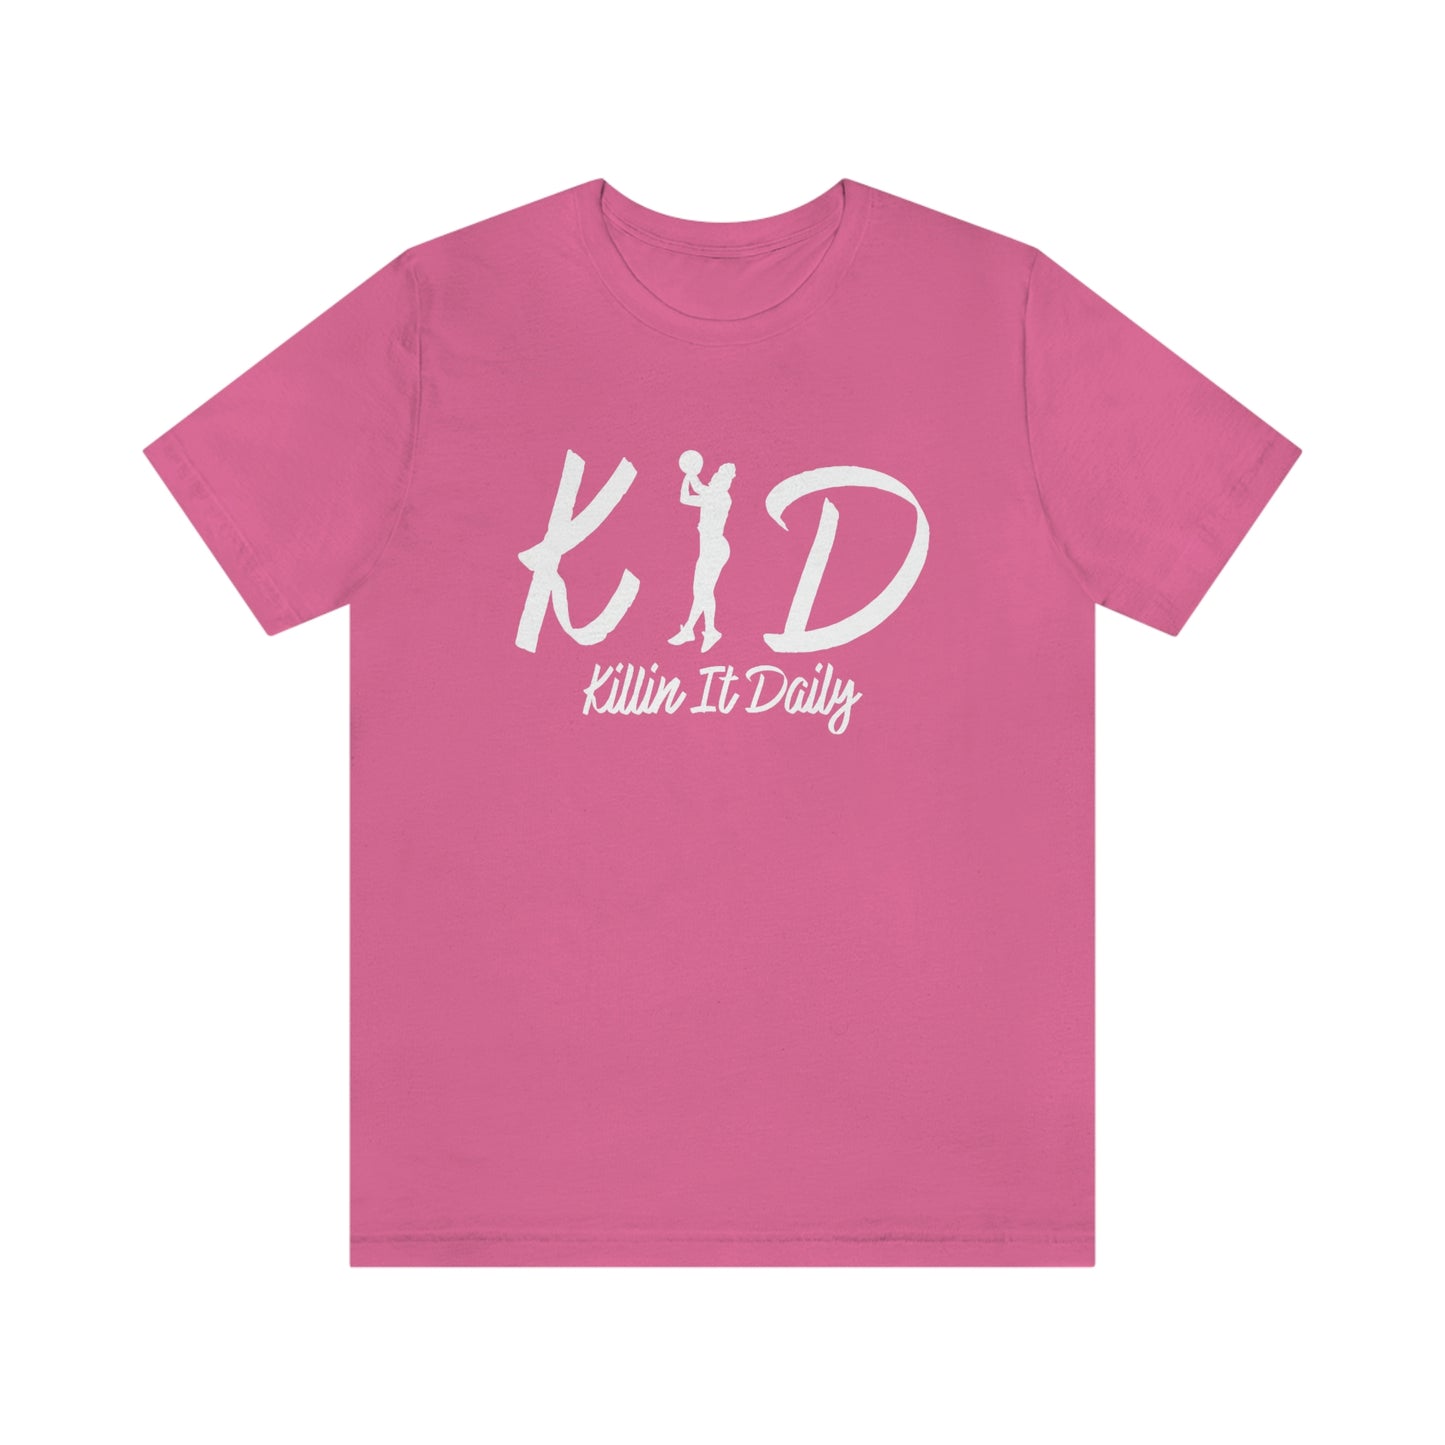 Kasey Kidwell: A Kid With a Dream Tee